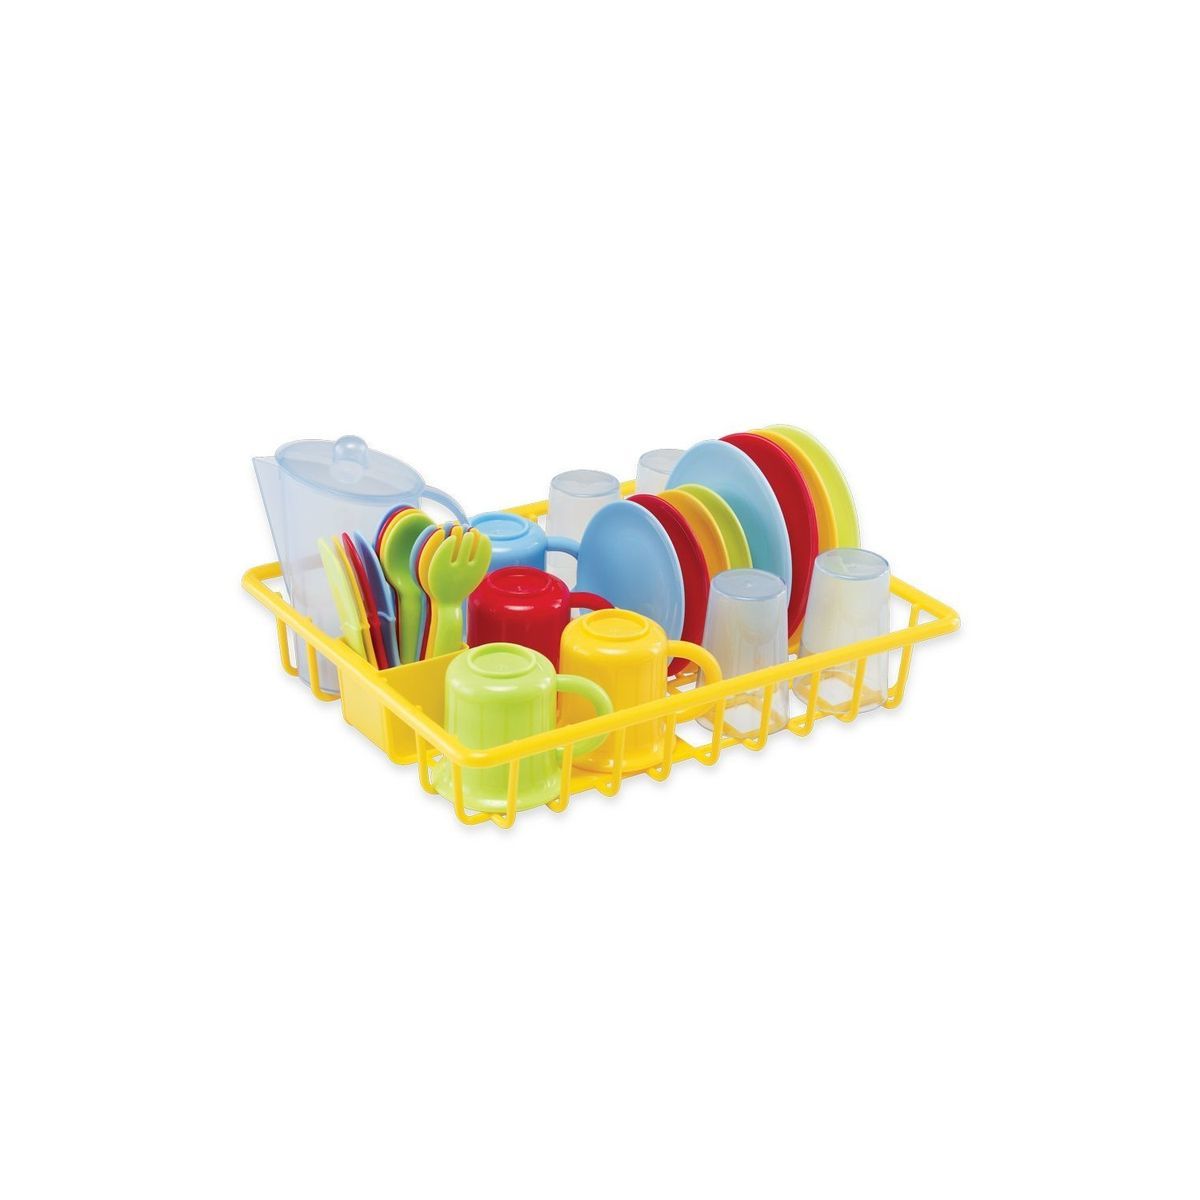 Dish Drainer Kids Kitchen Fun Pretend Play Kids Great for The